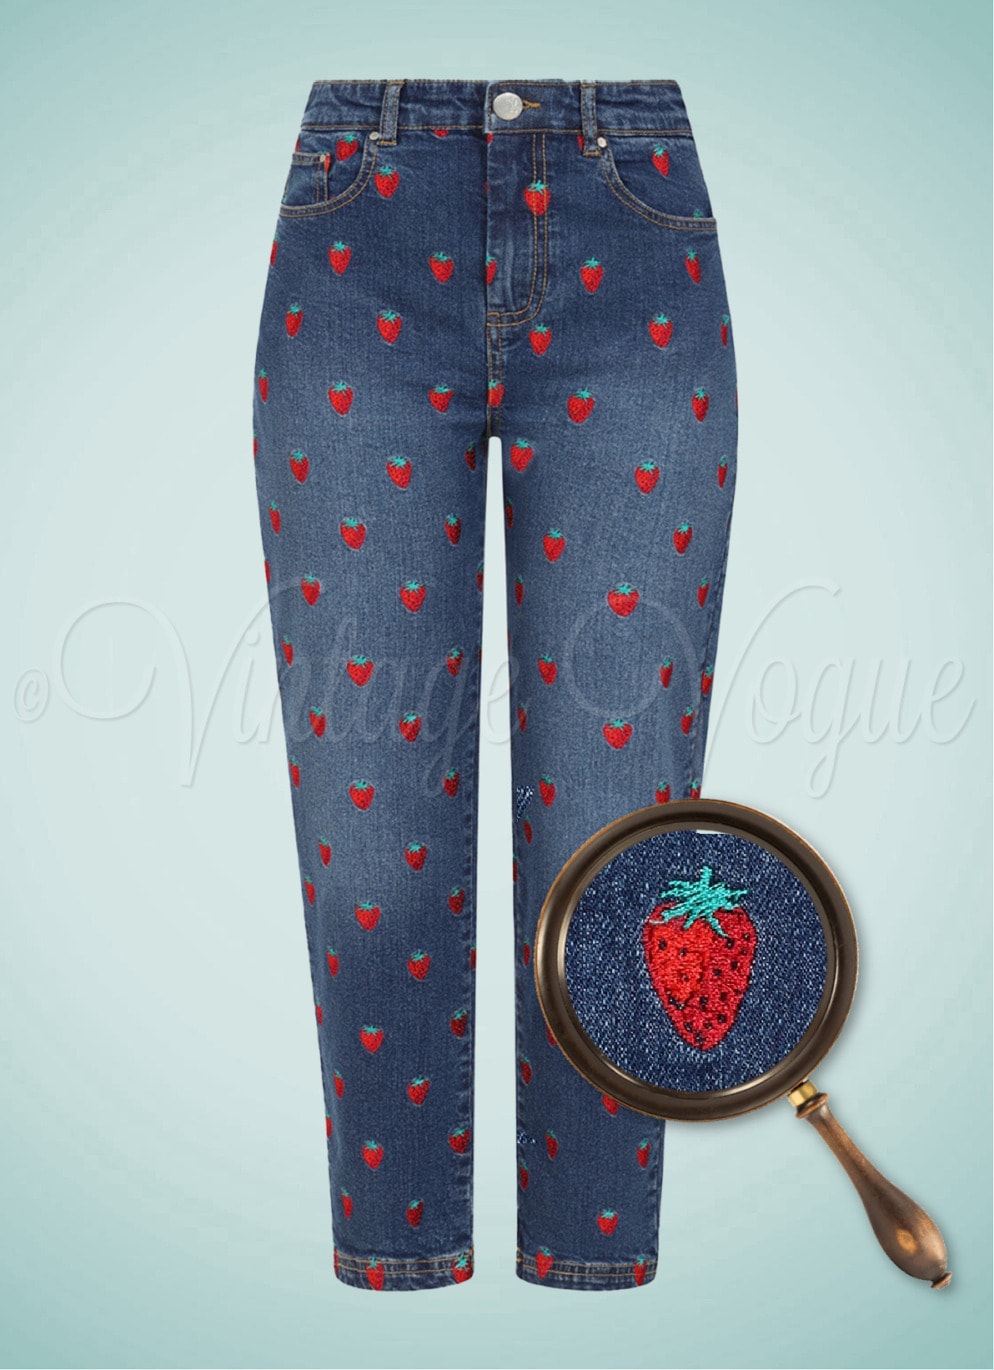 Hell Bunny 50er Jahre Retro Erdbeer Muster High Waist Jeans Hose Strawberry Jeans in Blau